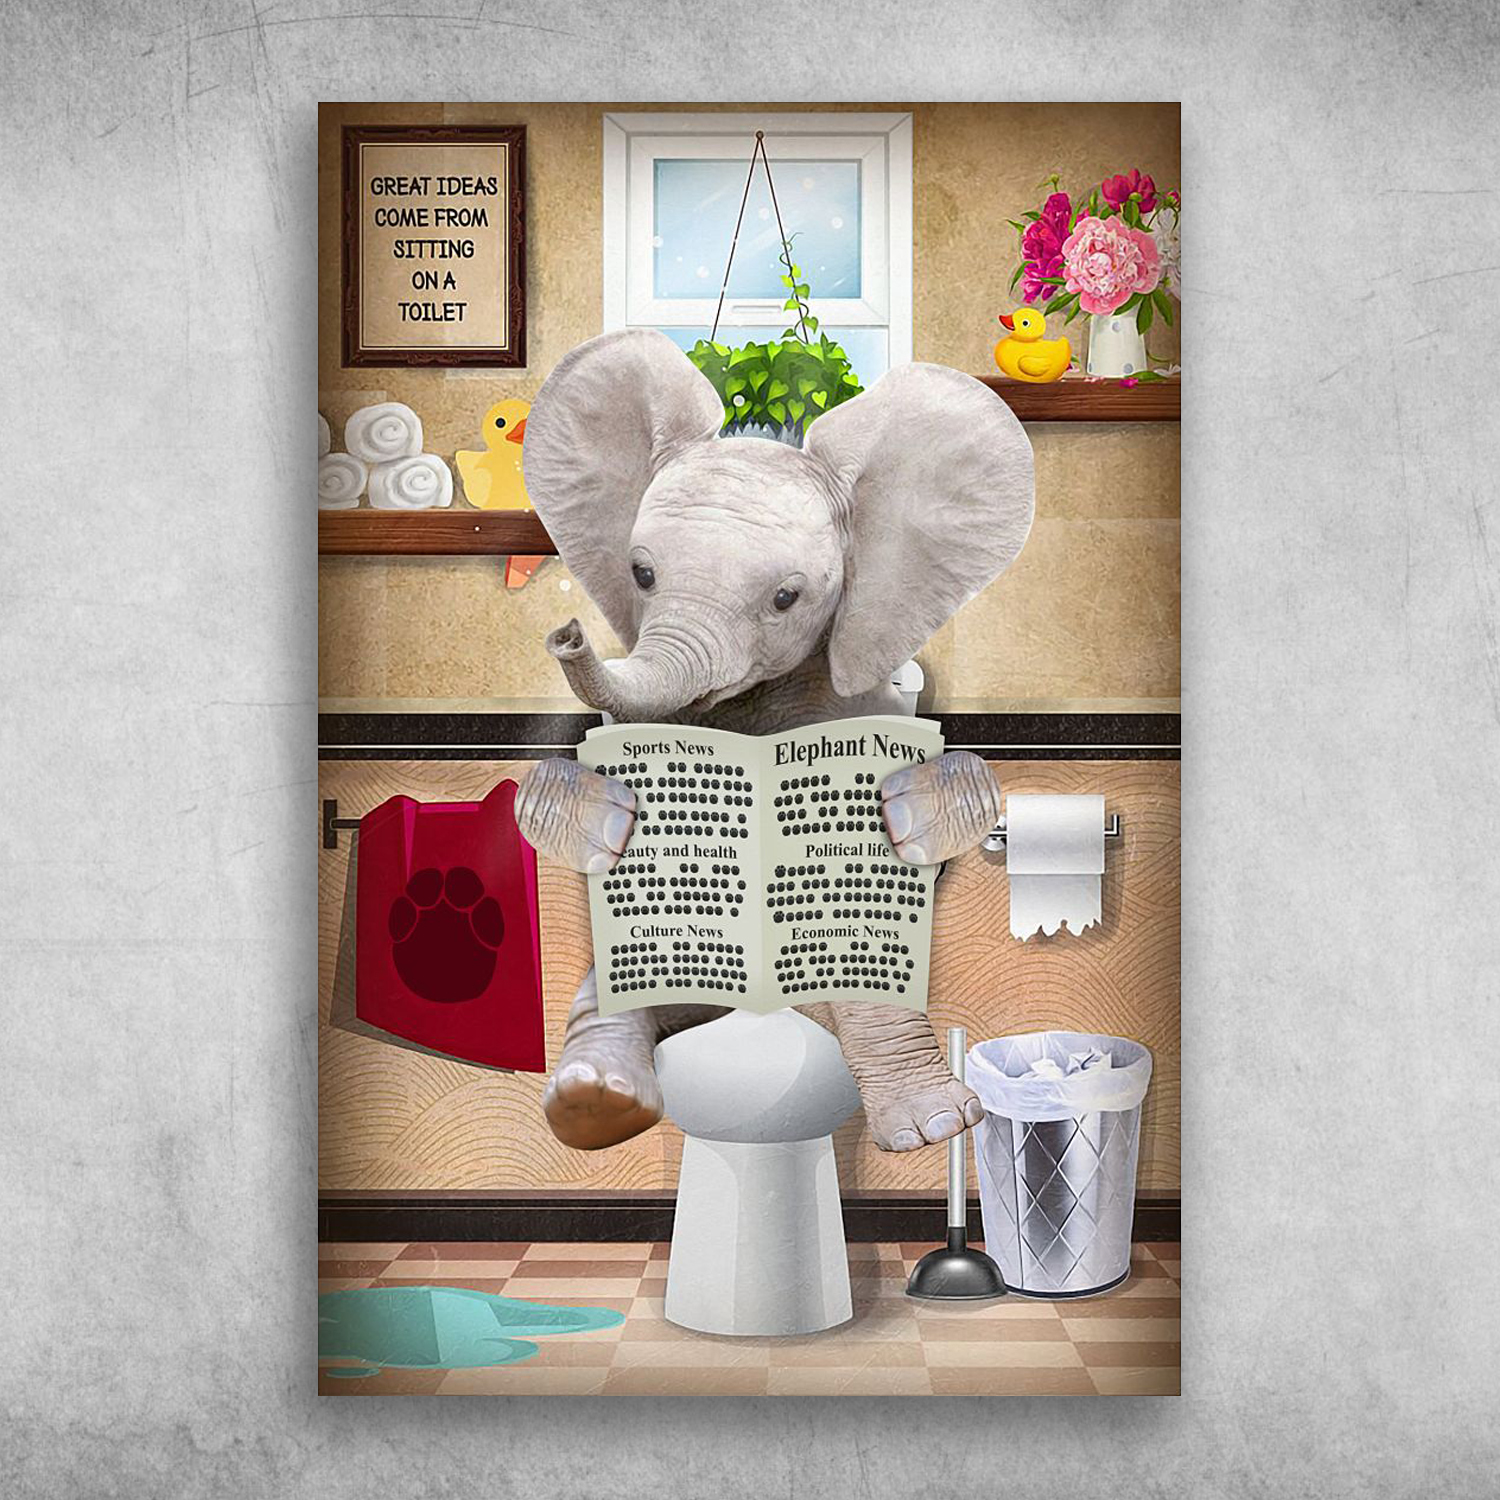 Great Ideas Come From Sitting On A Toilet Elephant Reading Newspaper